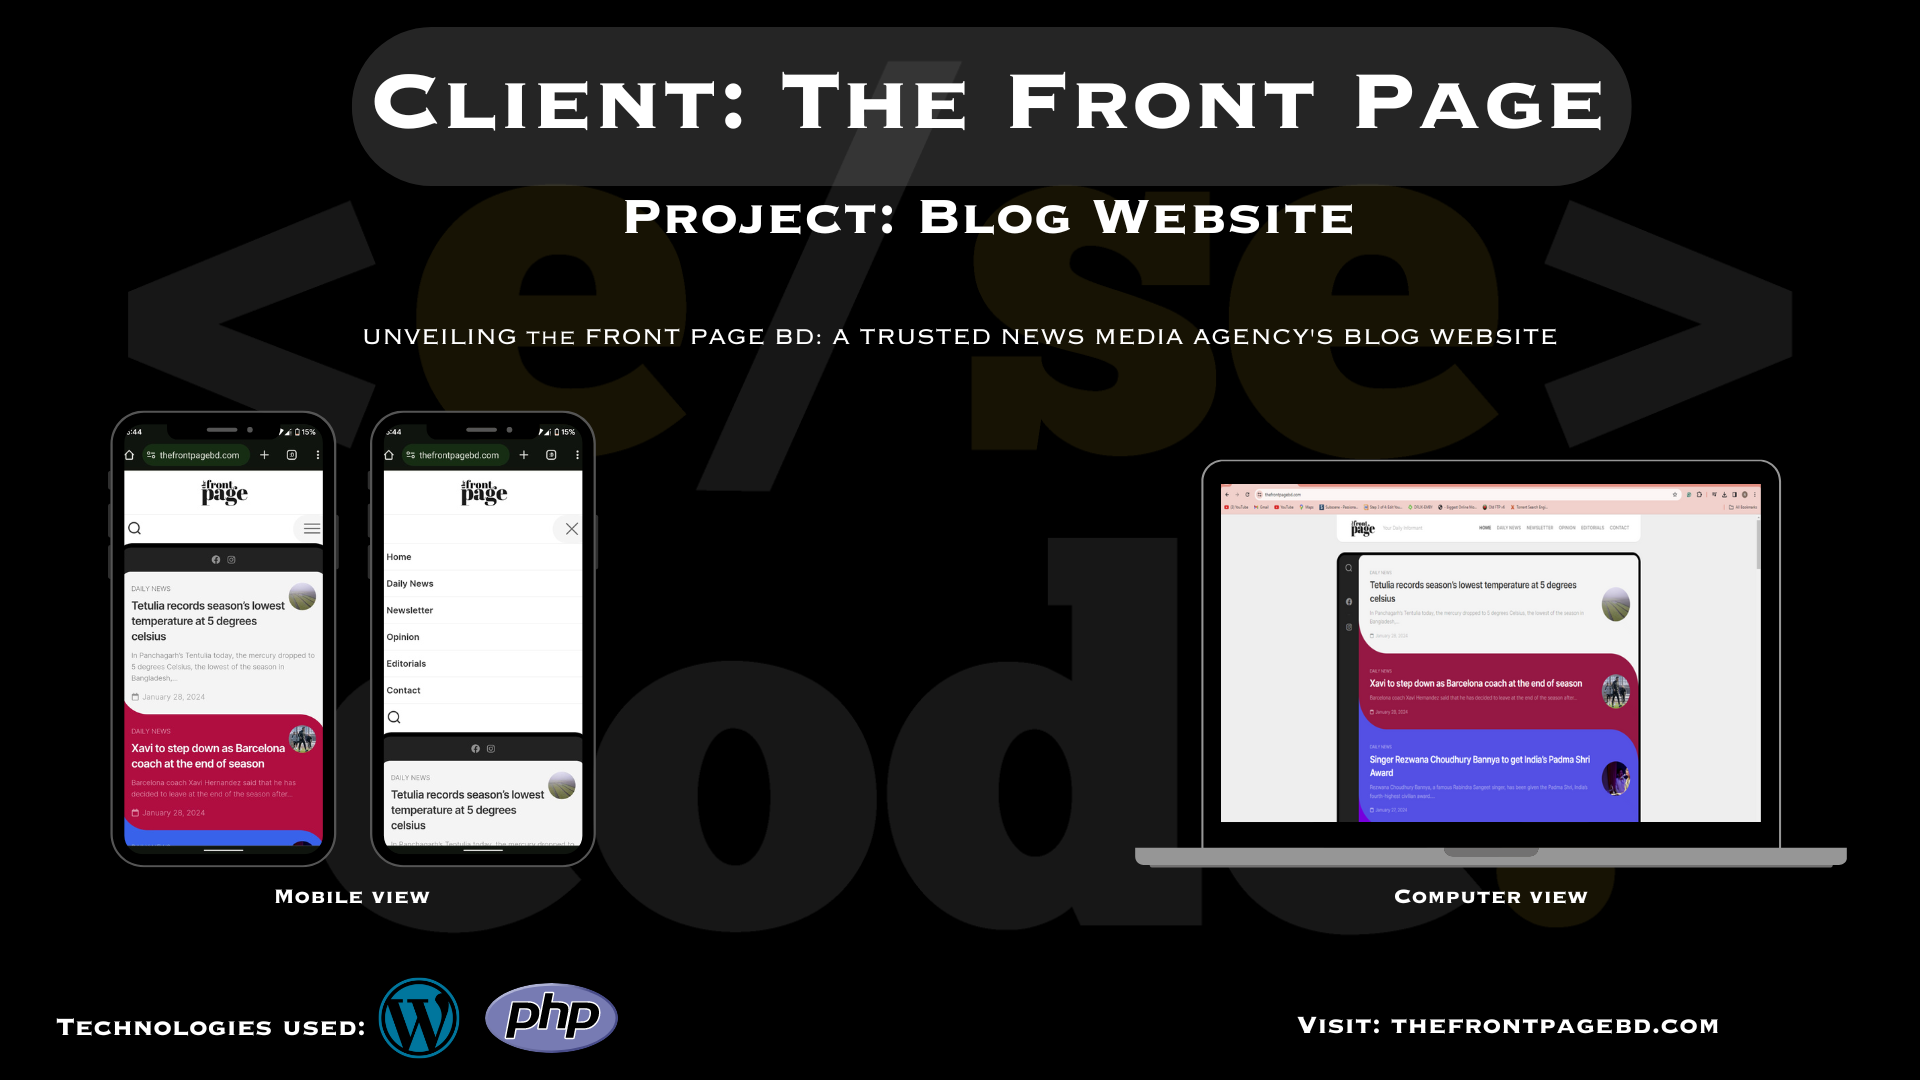  Unveiling FrontPage BD: A Trusted News Media Agency's Blog Website